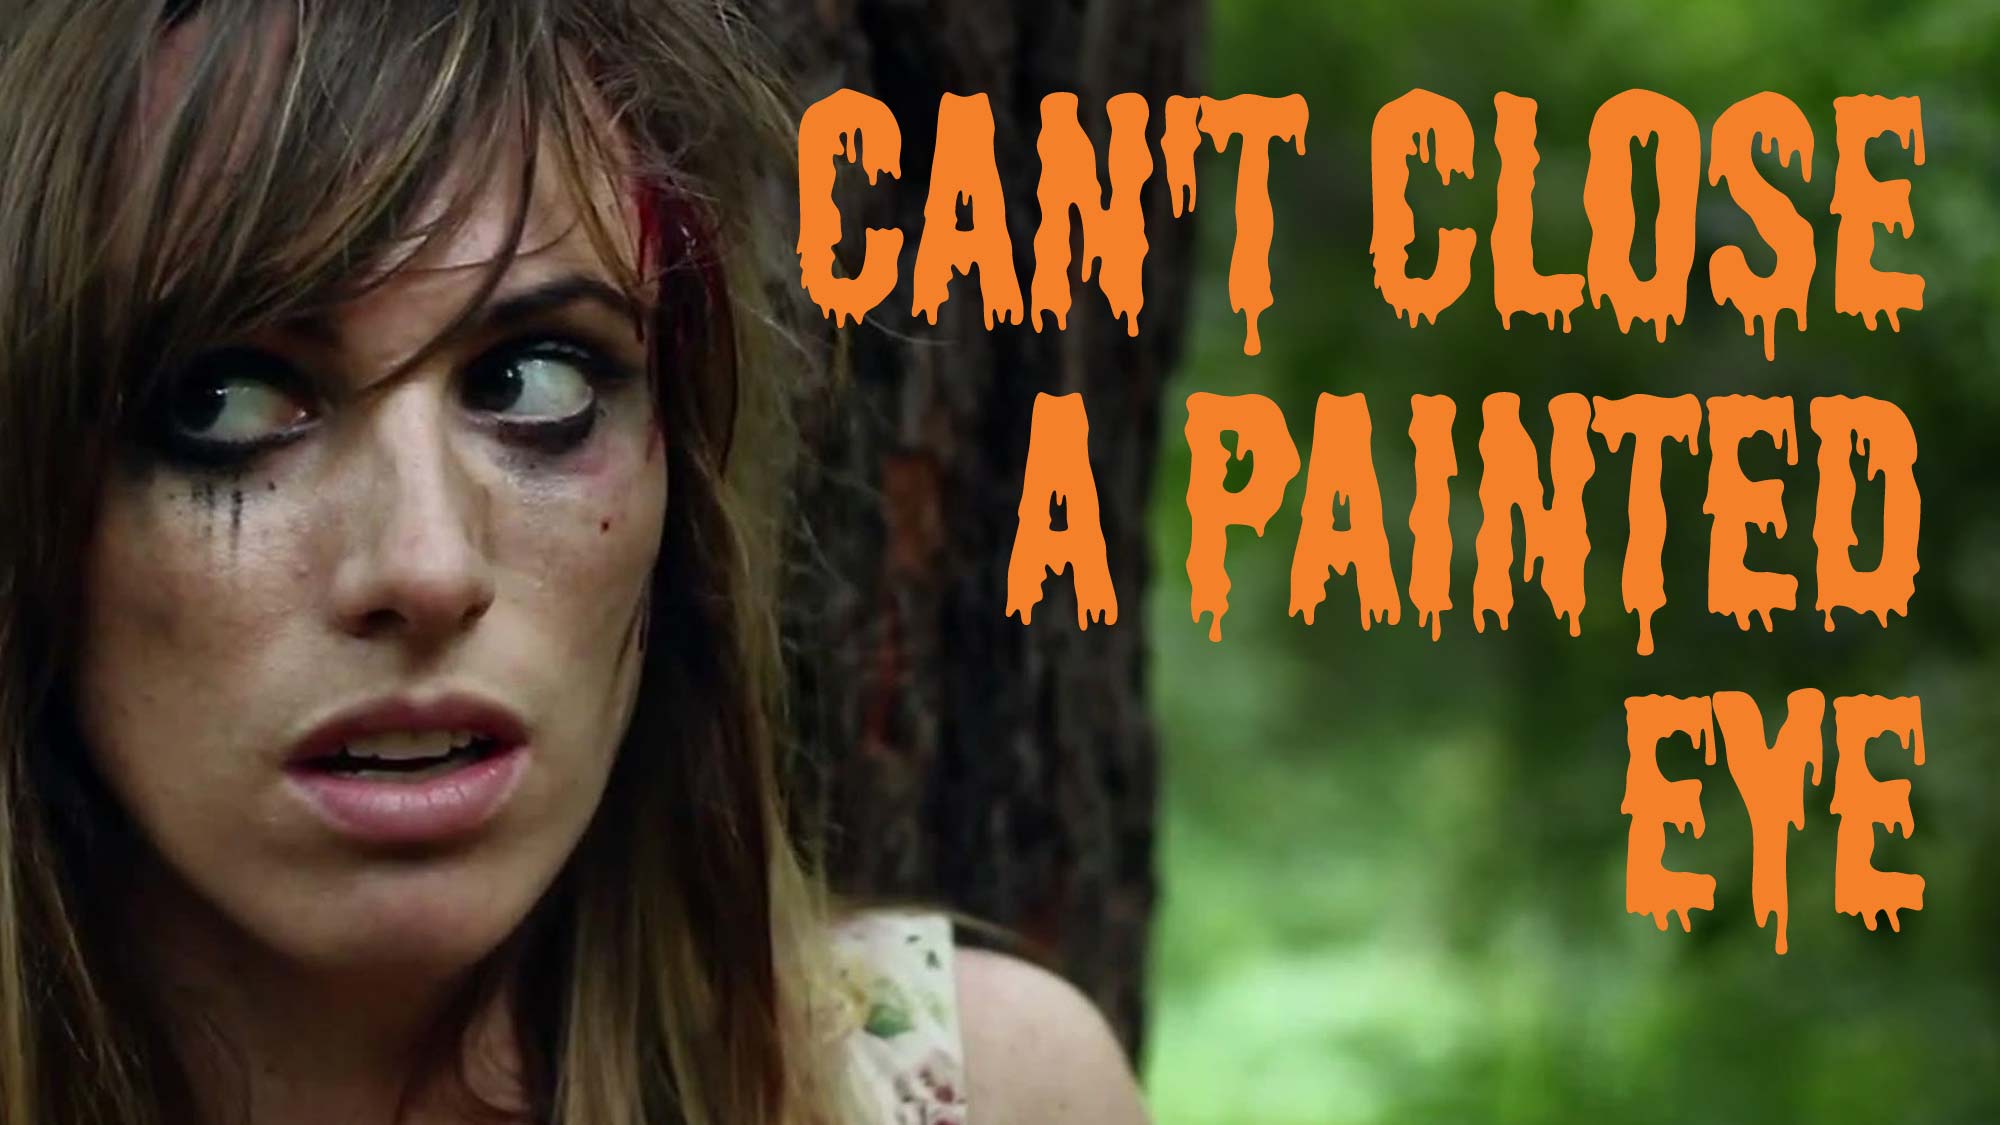 Short film: Can't close a painted eye